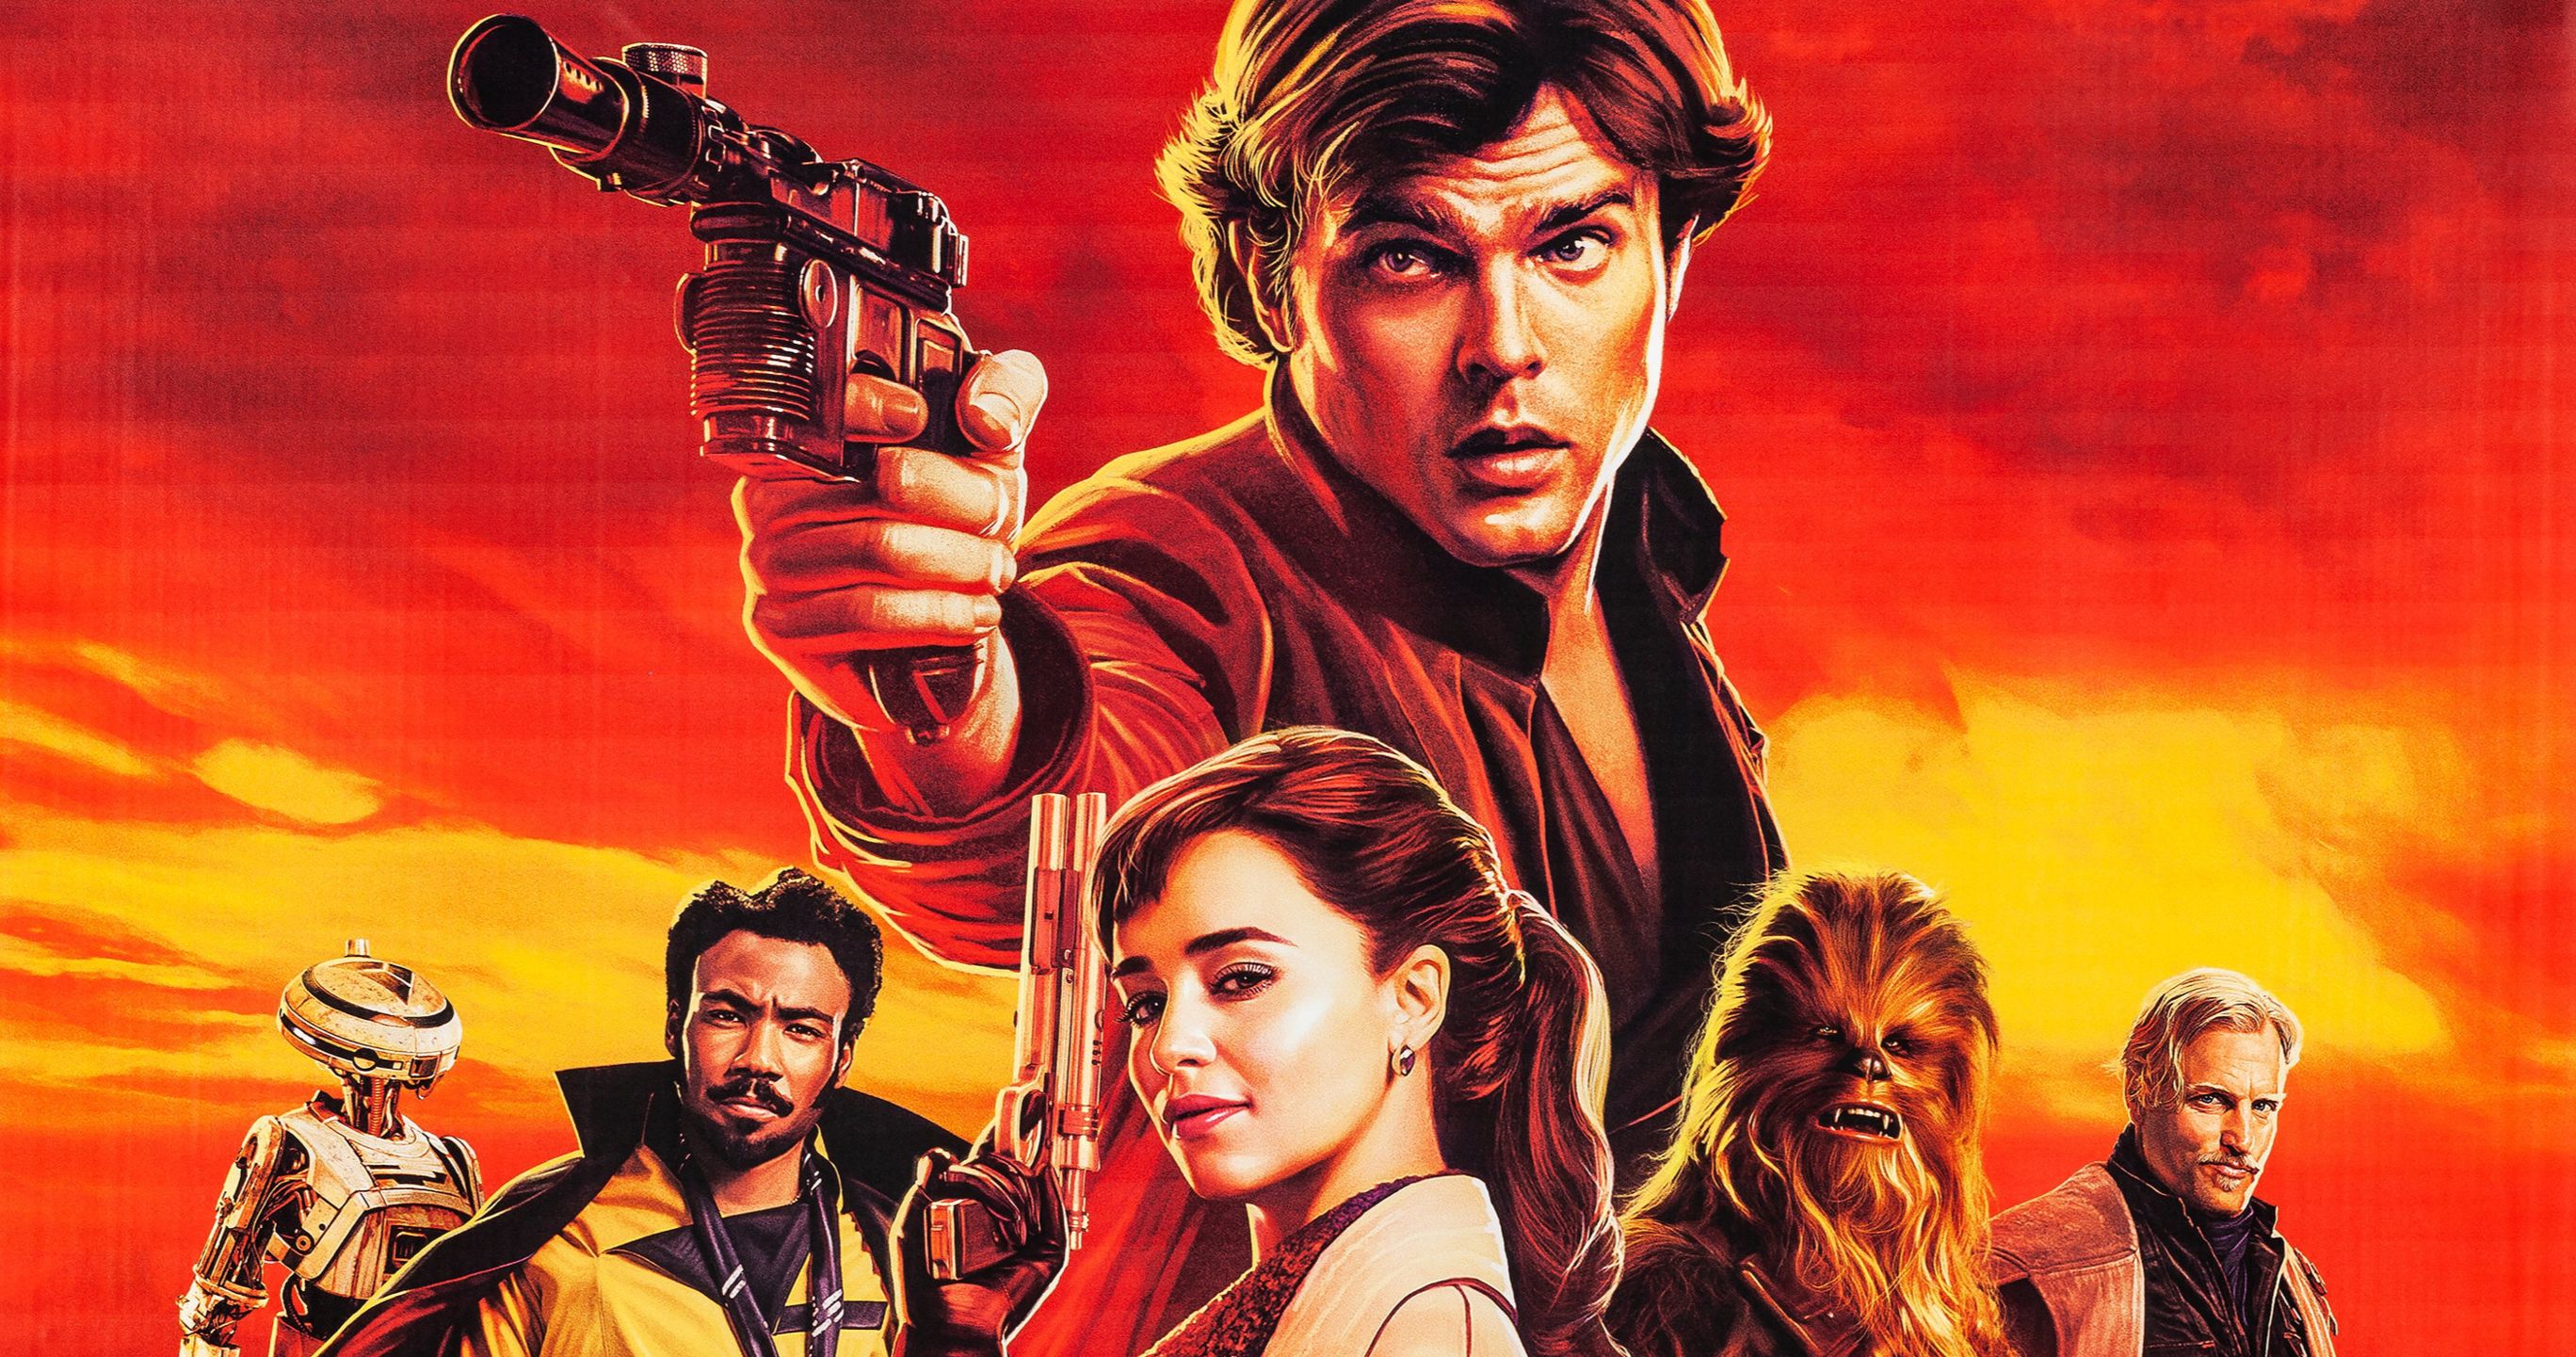 #MakeSolo2Happen Trends on 2nd Anniversary of Solo Hitting Theaters